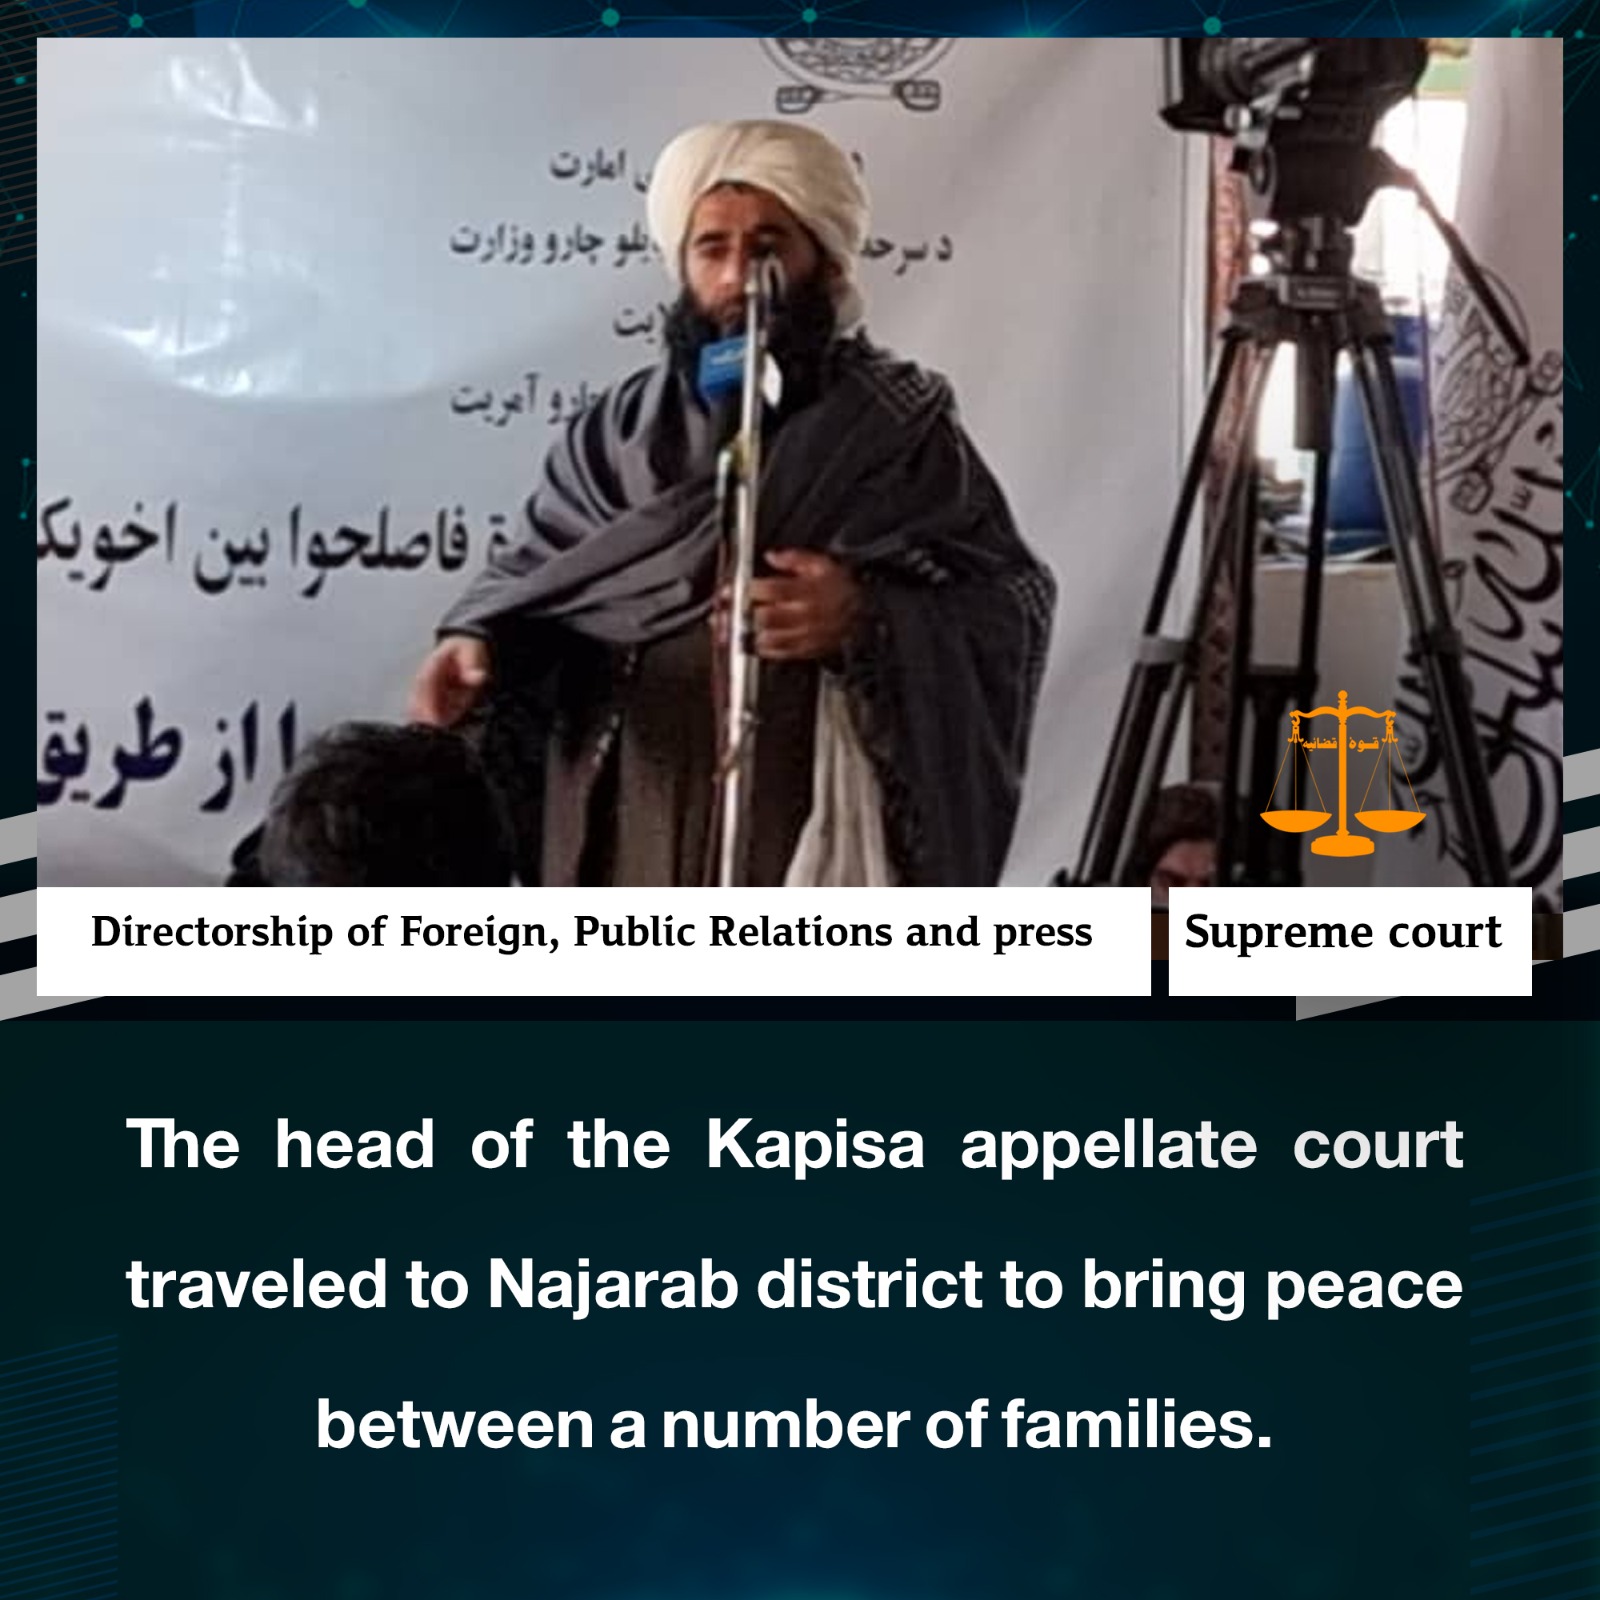 The head of the Kapisa appellate court traveled to Najarab district to bring peace between a number of families.